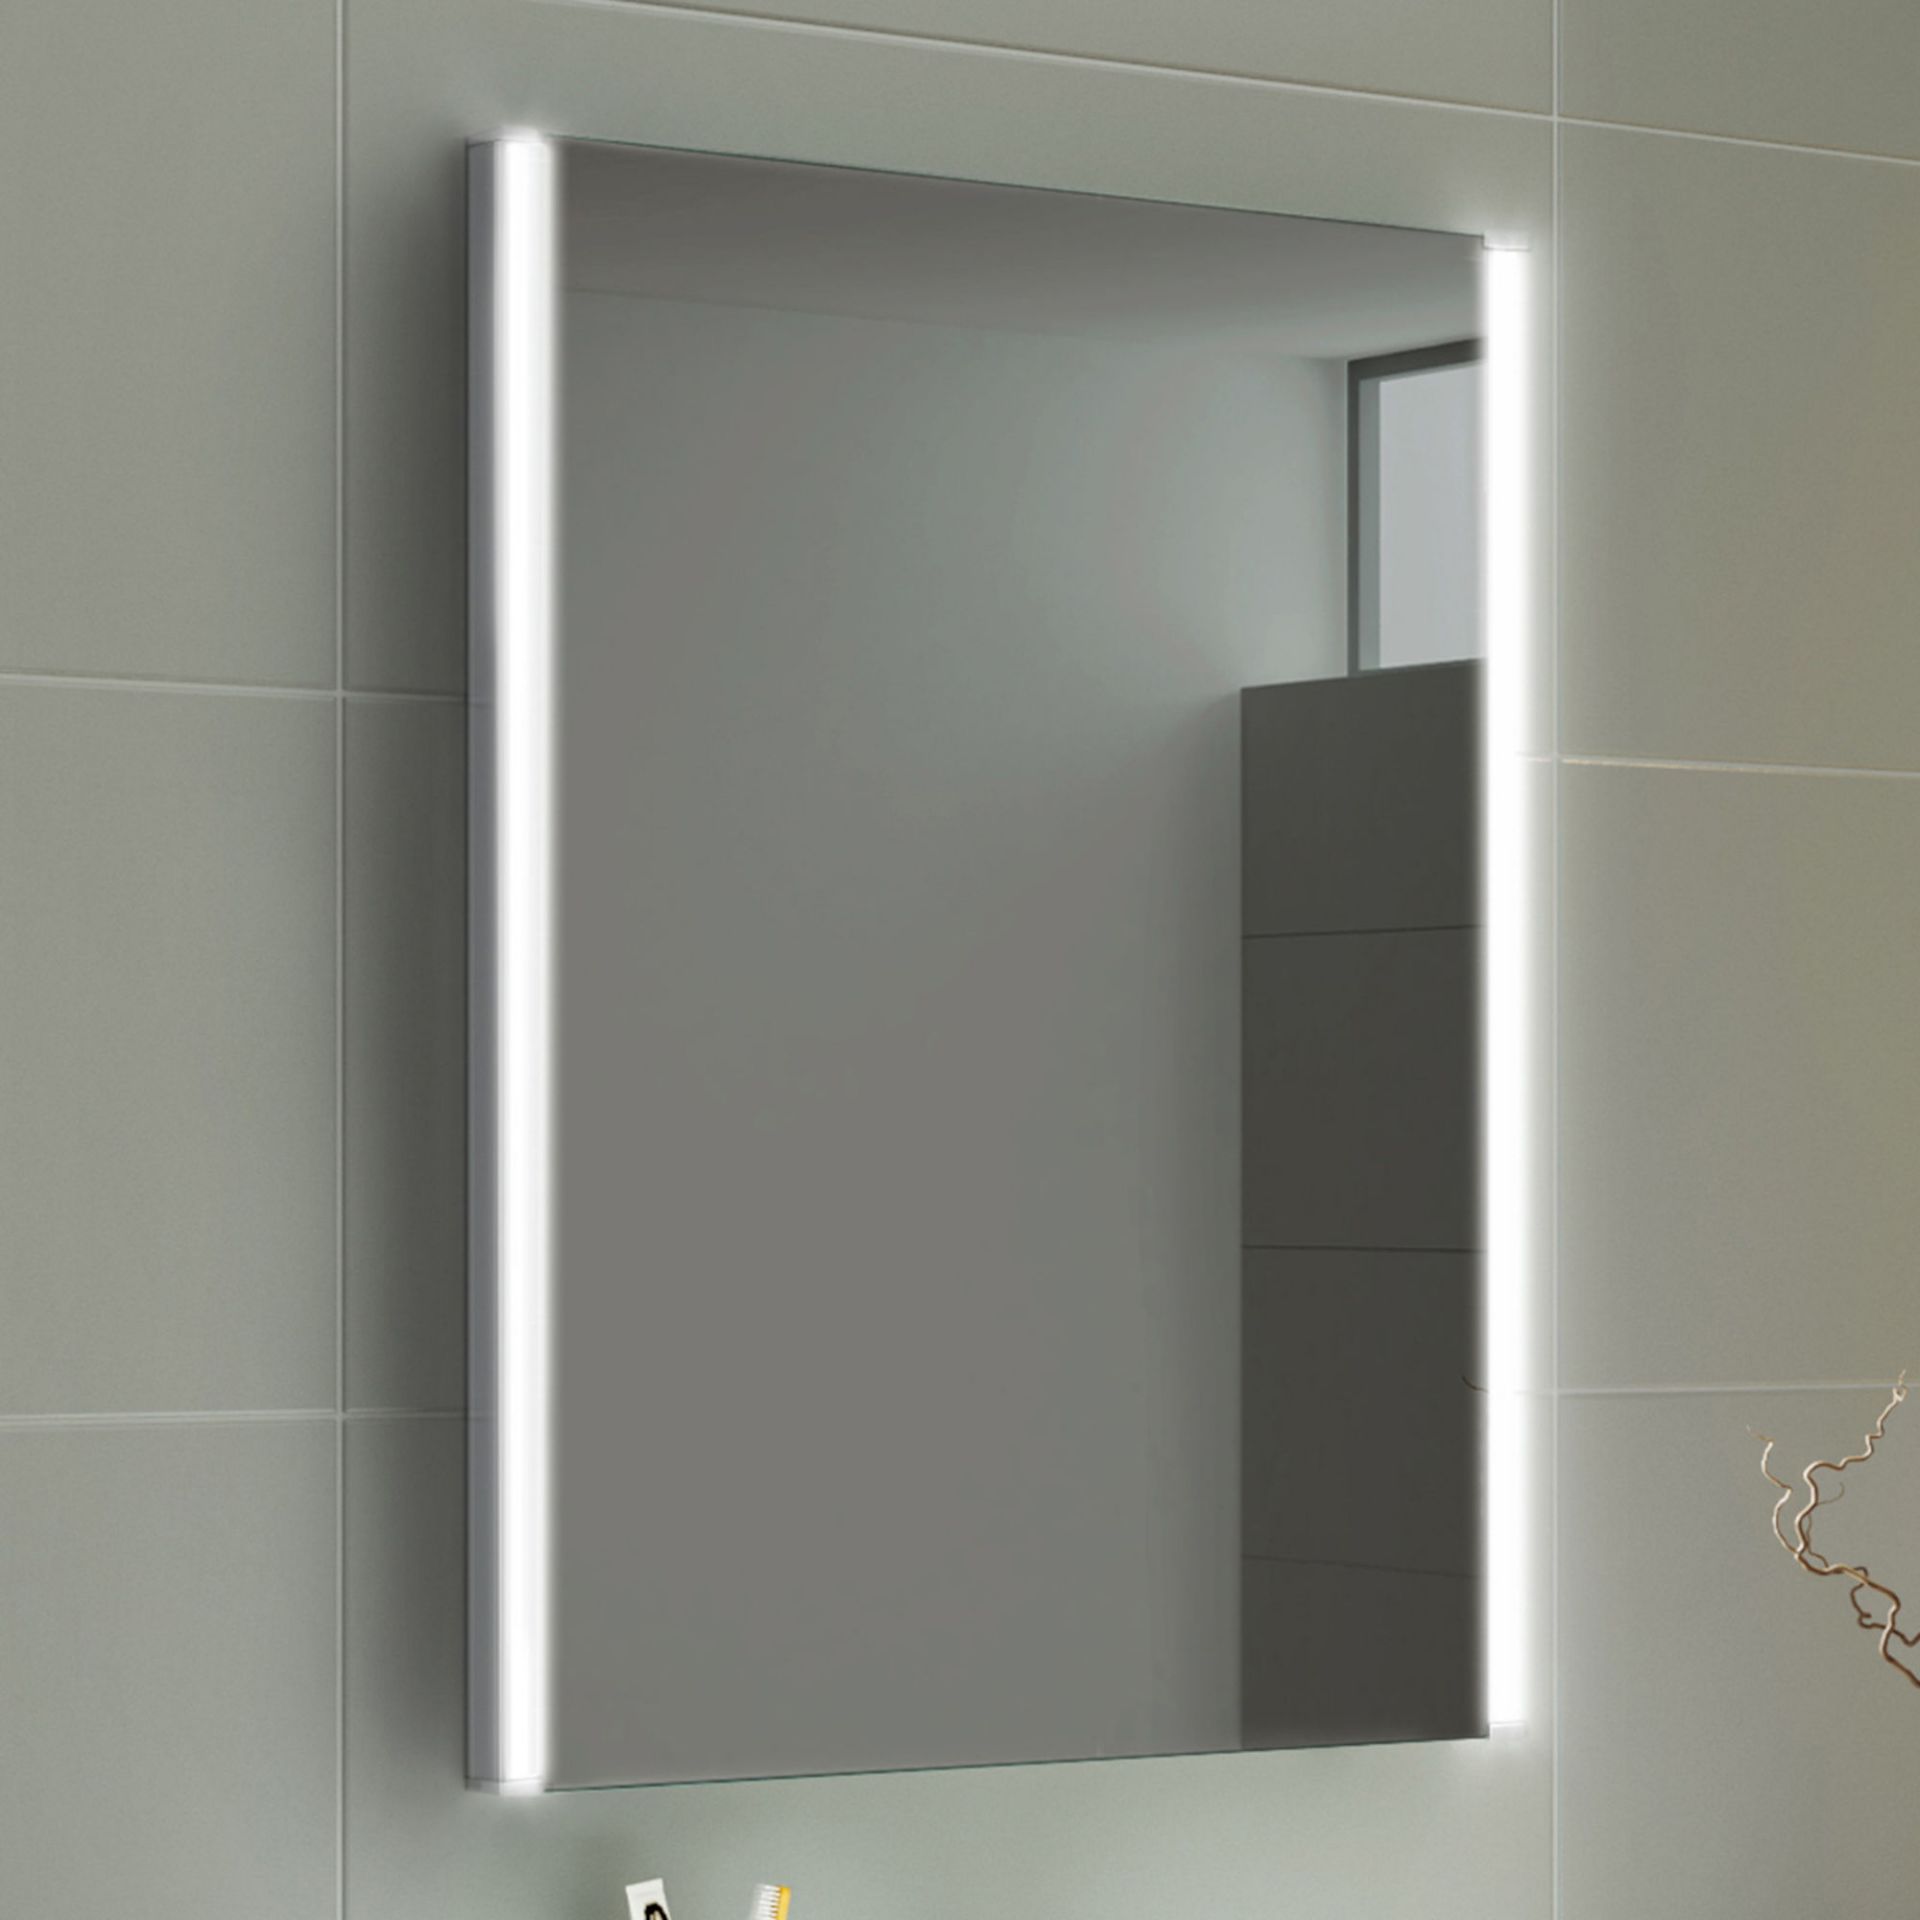 (MW91) 500x700mm Denver Illuminated LED Mirror - Battery Operated. Energy saving controlled On / Off